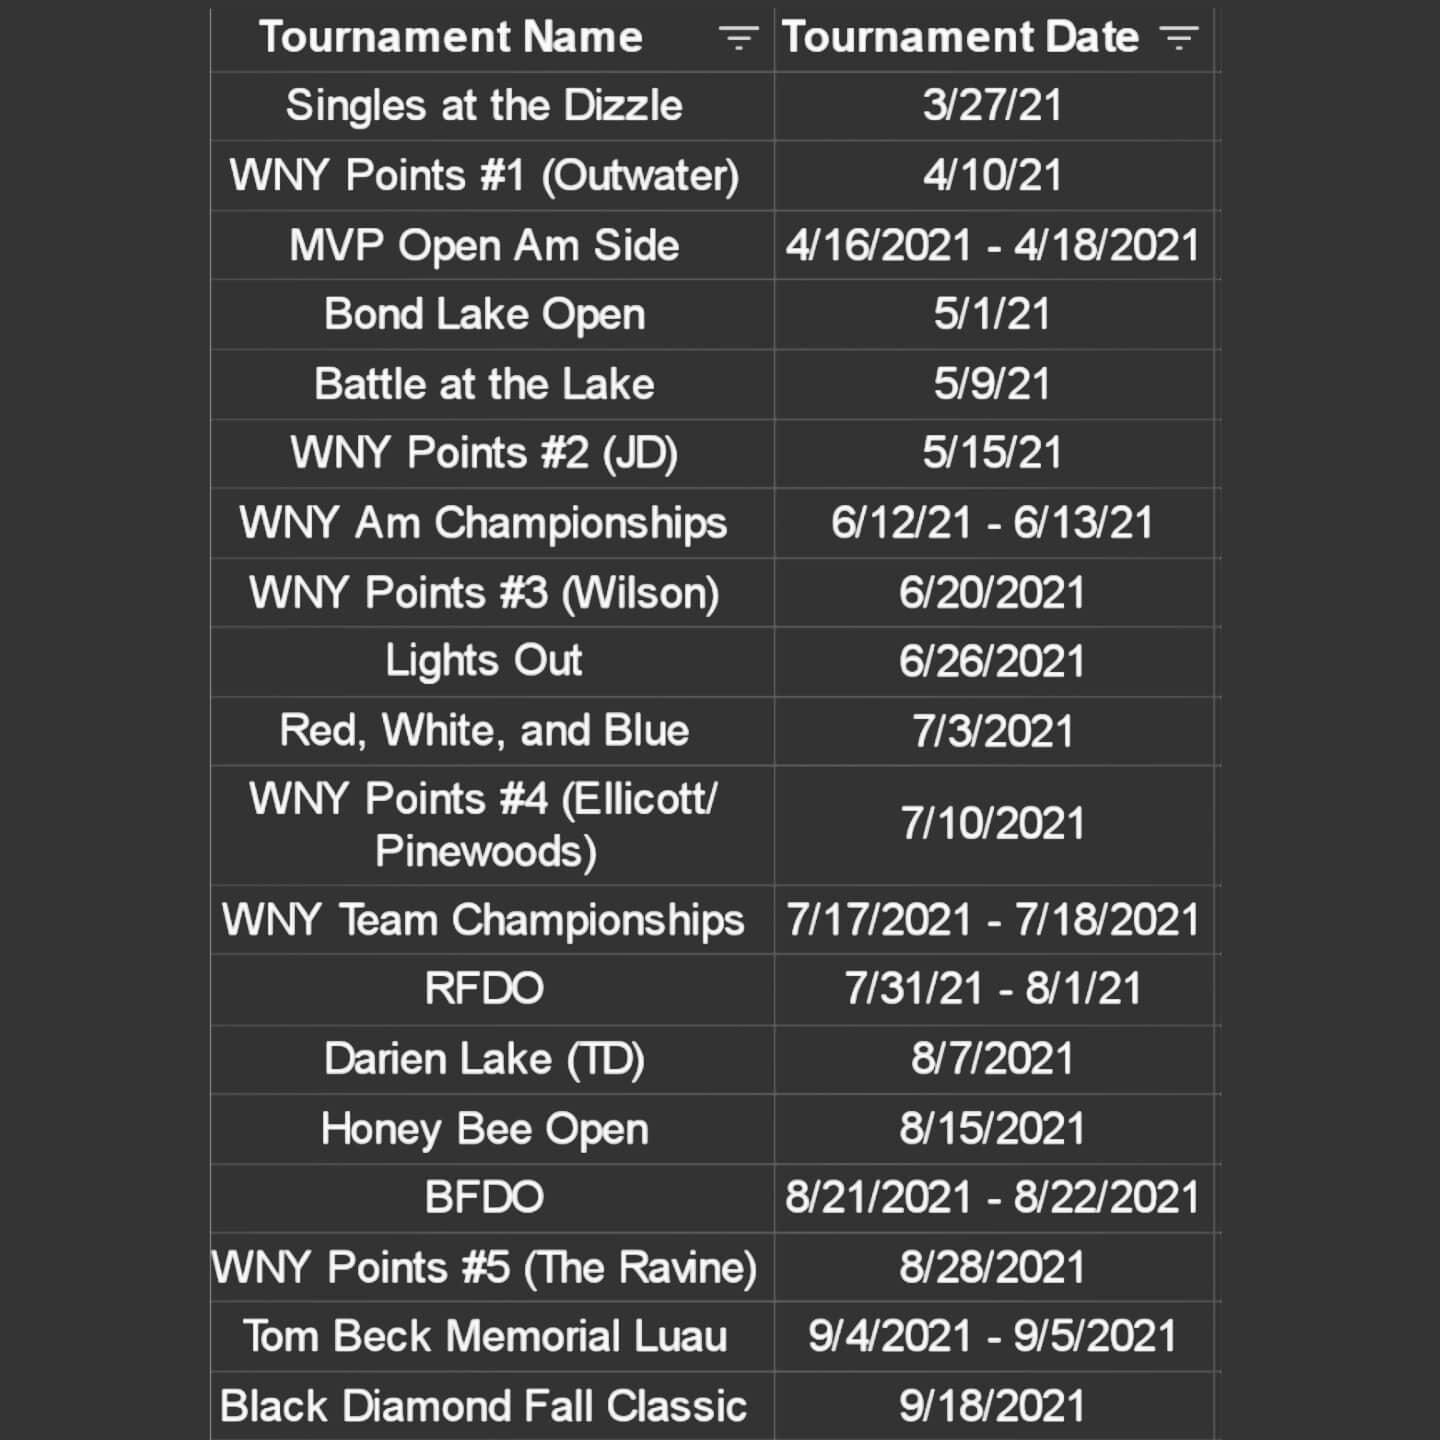 Here's the first draft of my tournament schedule for 2021. I know there will be some random ones popping up throughout the year that I won't be able to resist to play 😏

I'm really hoping to get registered in time for the Am side MVP Open! My sister